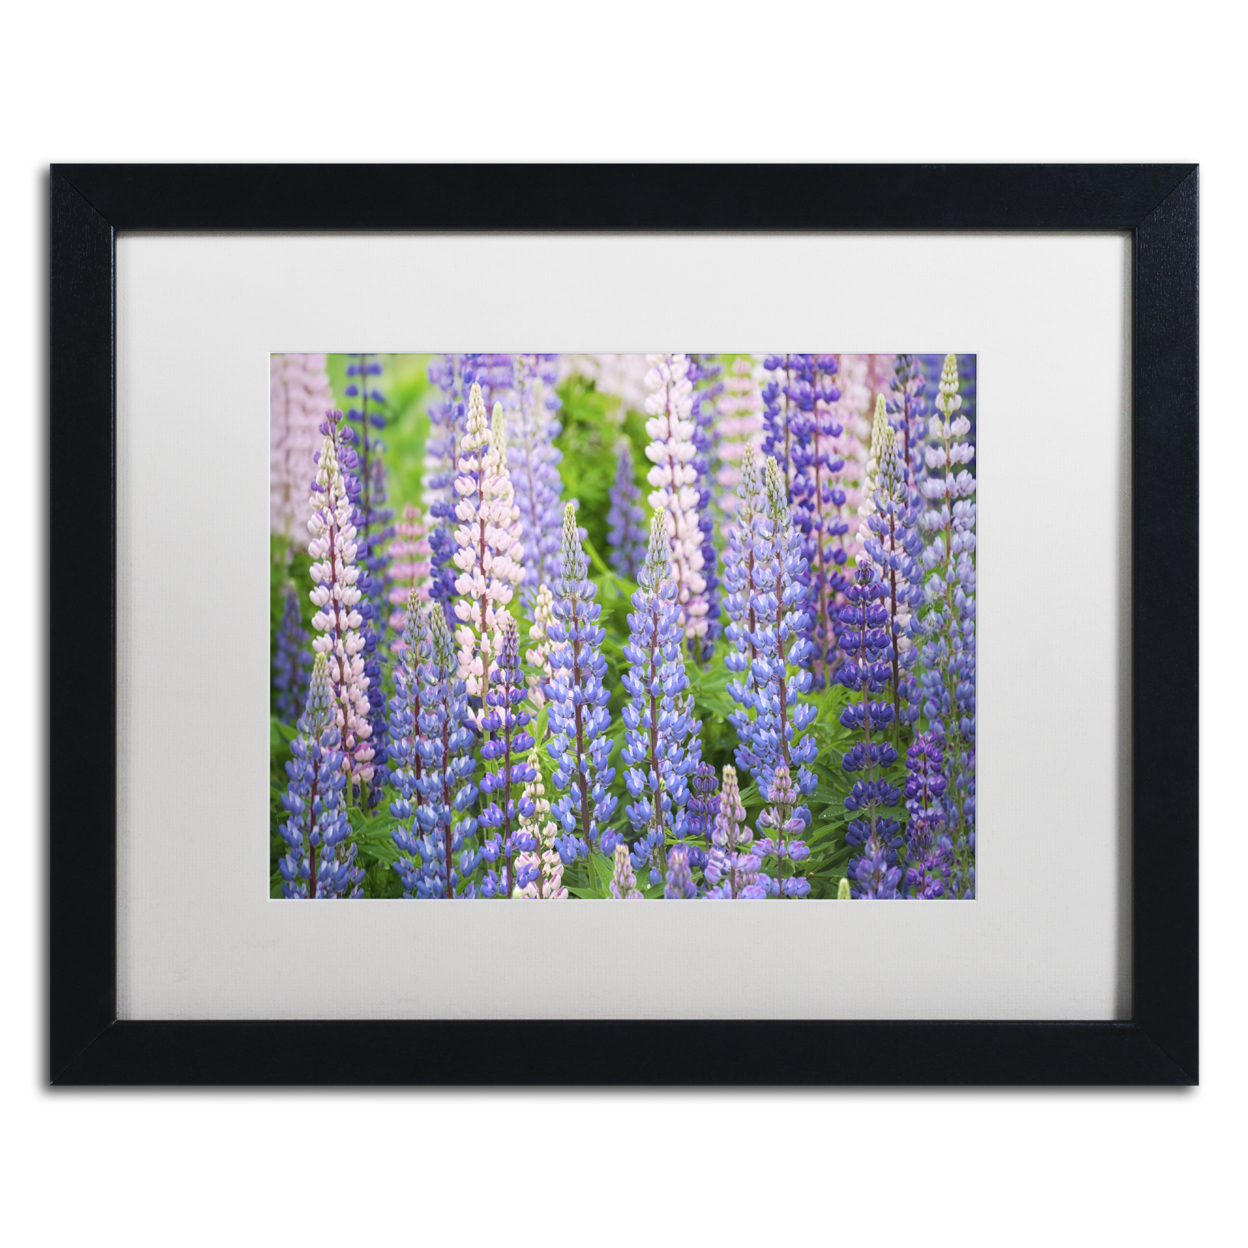 Cora Niele 'Blue Pink Lupine Field' Black Wooden Framed Art 18 X 22 Inches